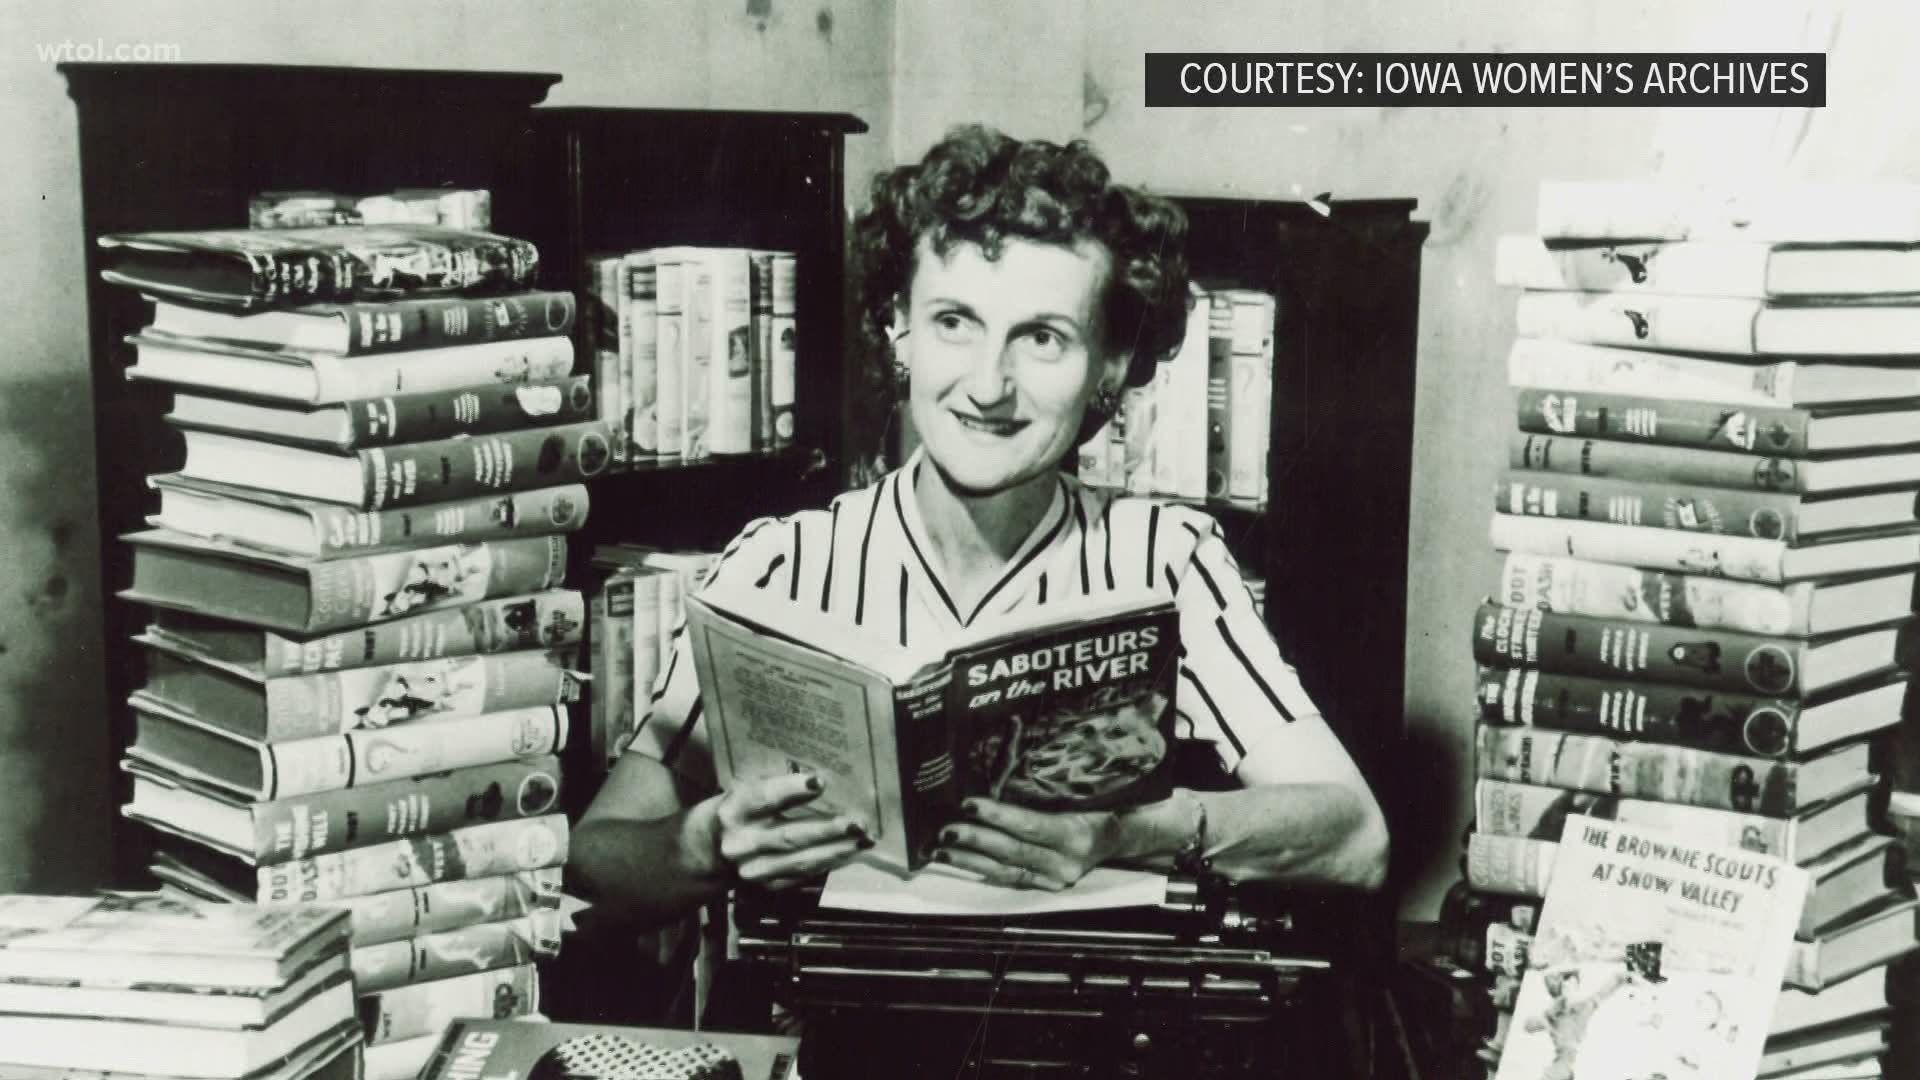 Millie Benson was the original ghostwriter of the Nancy Drew series, but many didn't know until decades later.